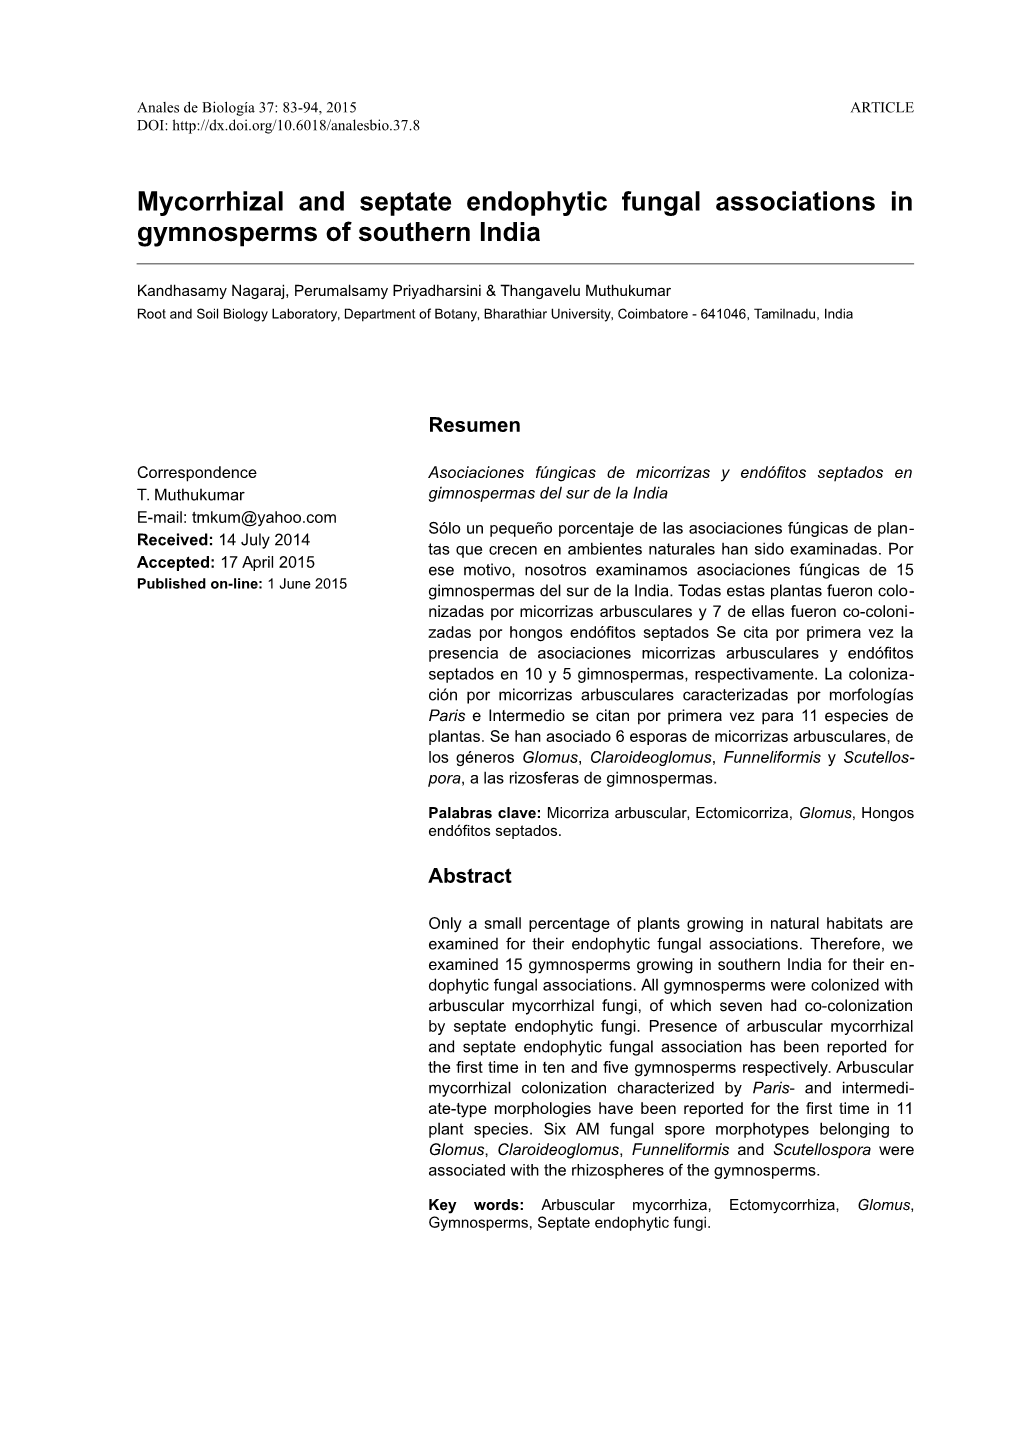 Mycorrhizal and Septate Endophytic Fungal Associations in Gymnosperms of Southern India